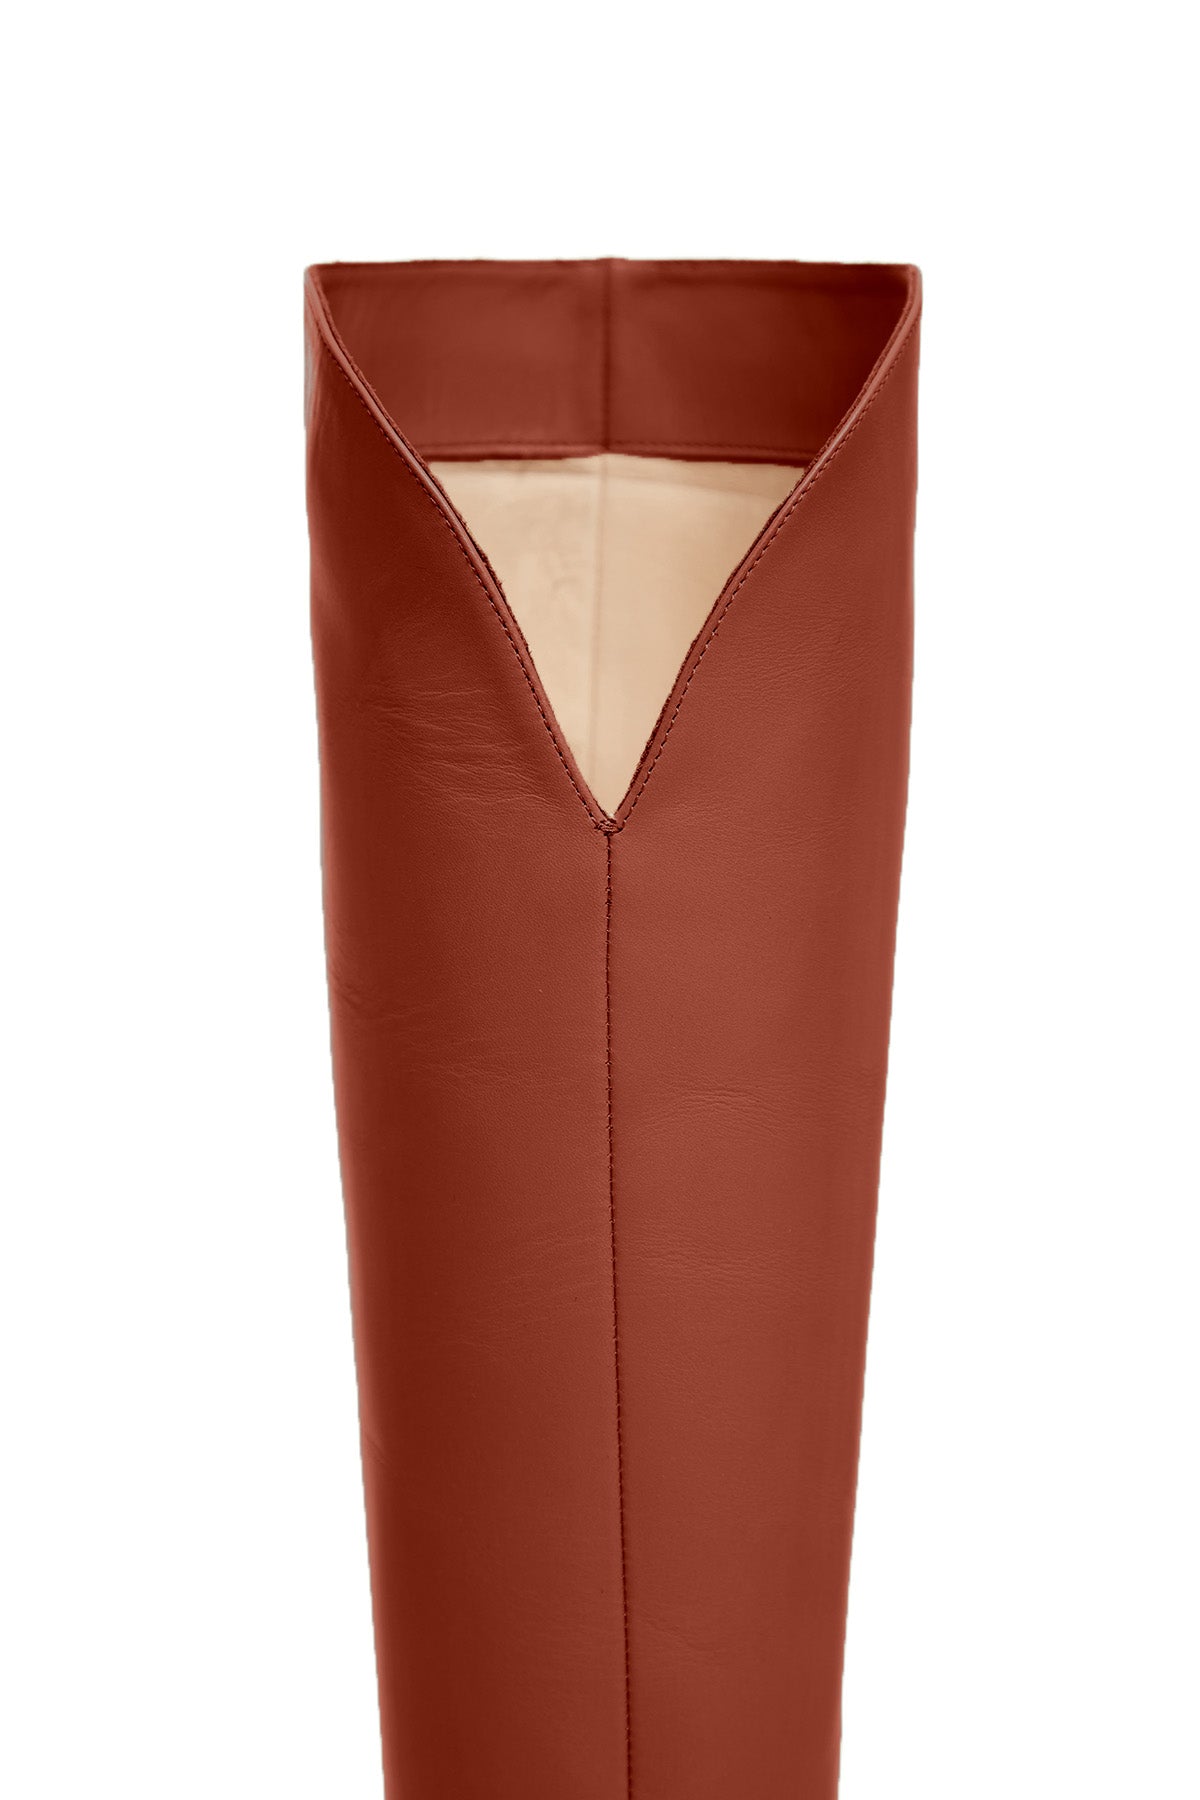 Cora High Knee Boot in Cognac Leather